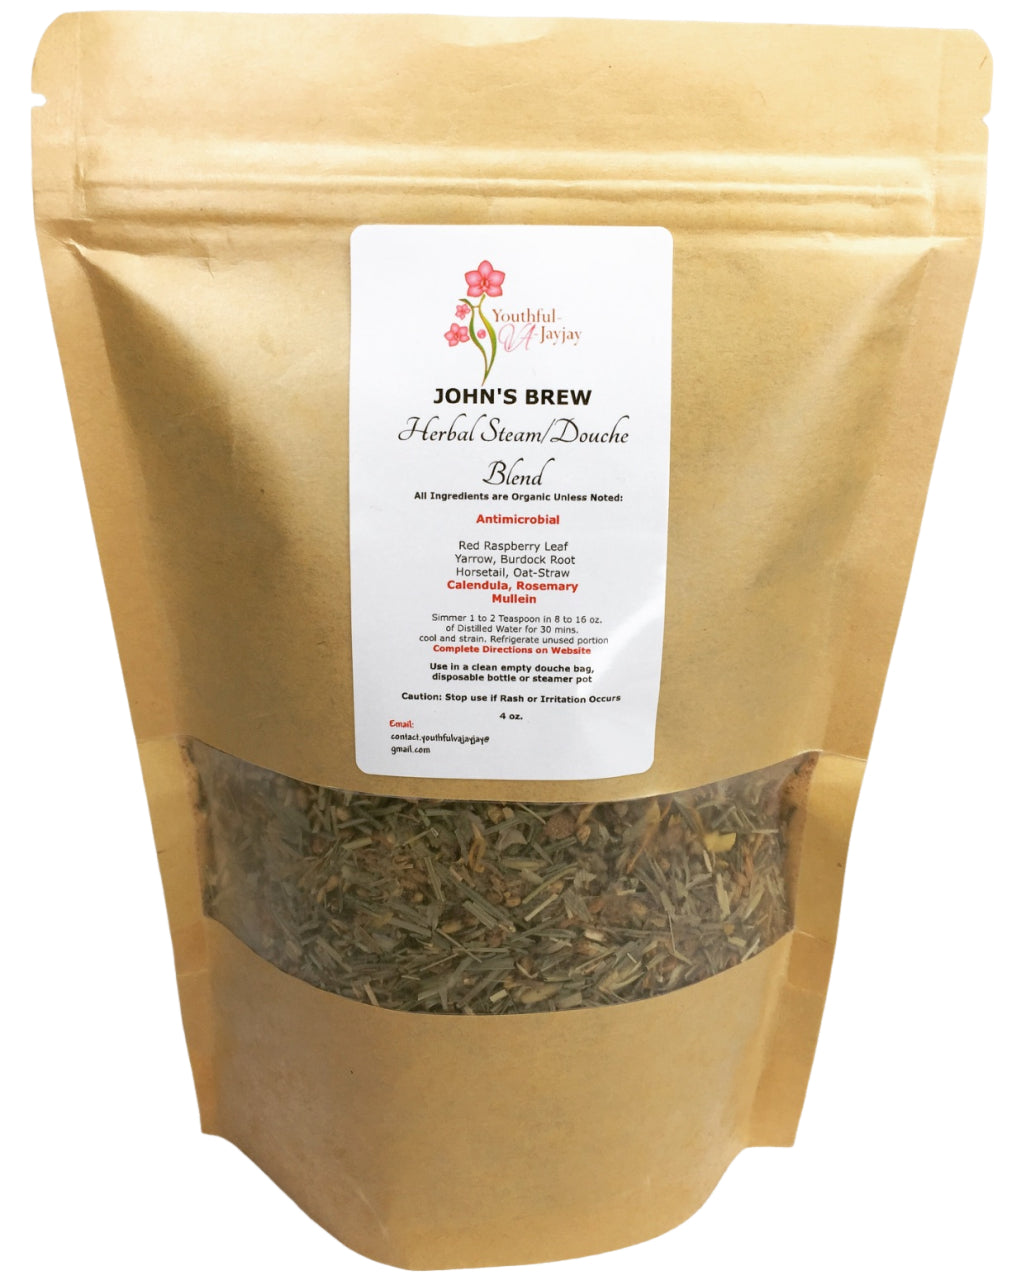 JOHN'S BREW- Organic Herbal Douche/Steam Blend: For Him, Handcrafted Natural Antibacterial 4oz.